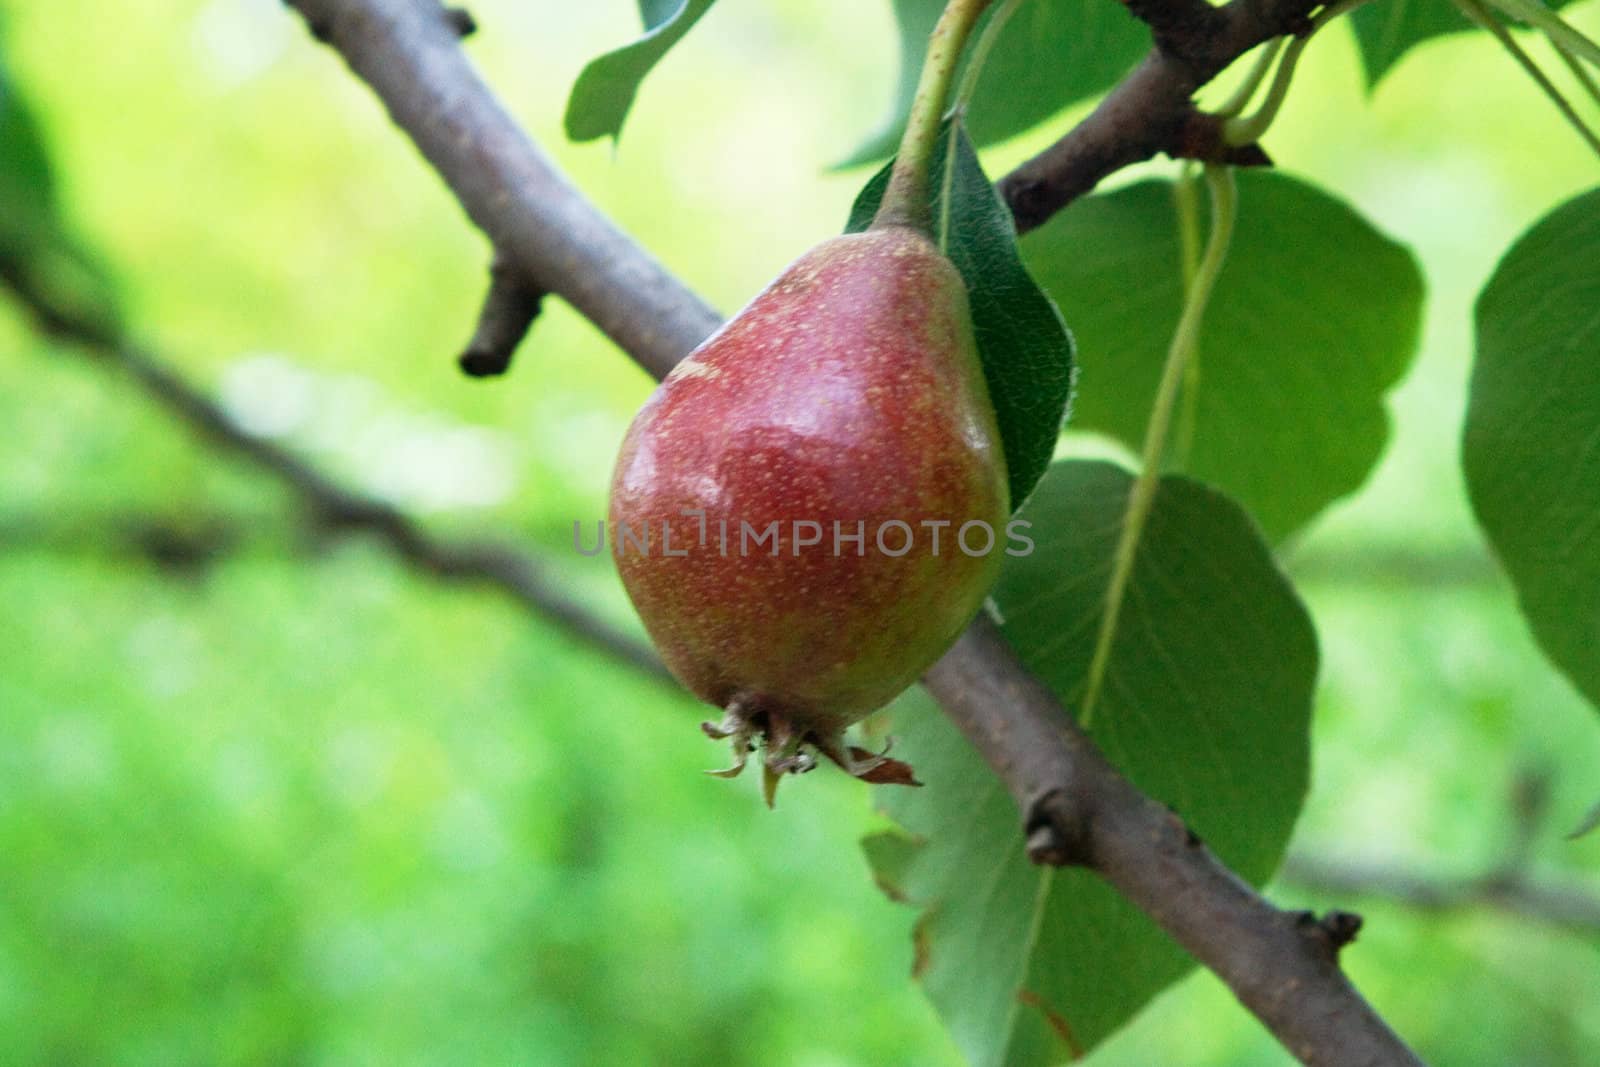 Small unripe pear hanging from a branch of a tree in a summer garden